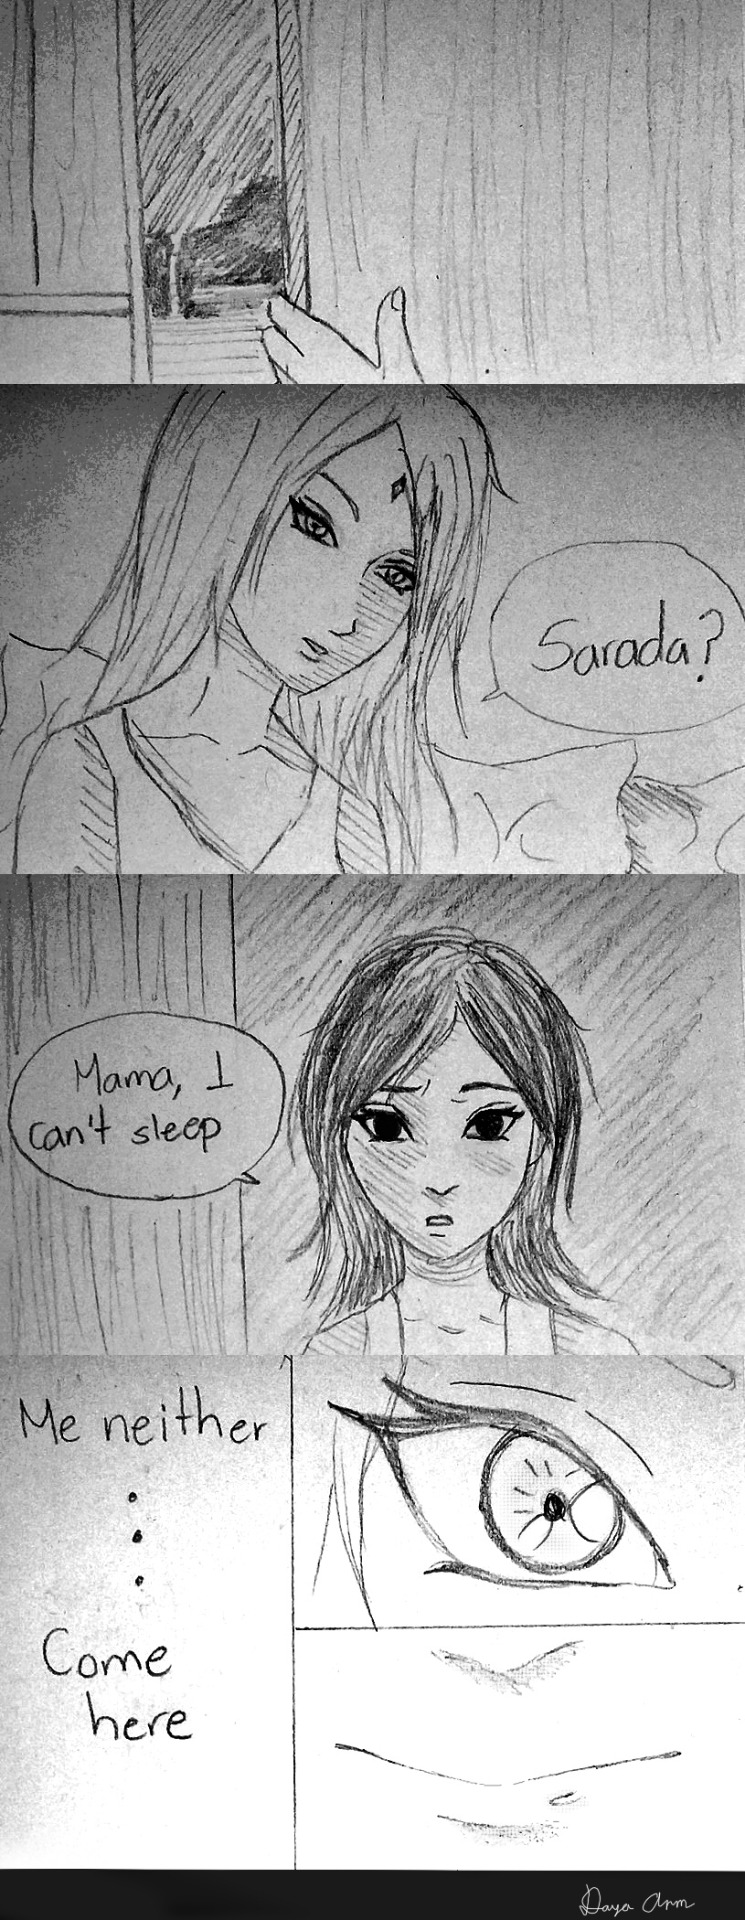 daya-arm:  “In rainy nights Sarada goes to her mother’s arms, where she feels